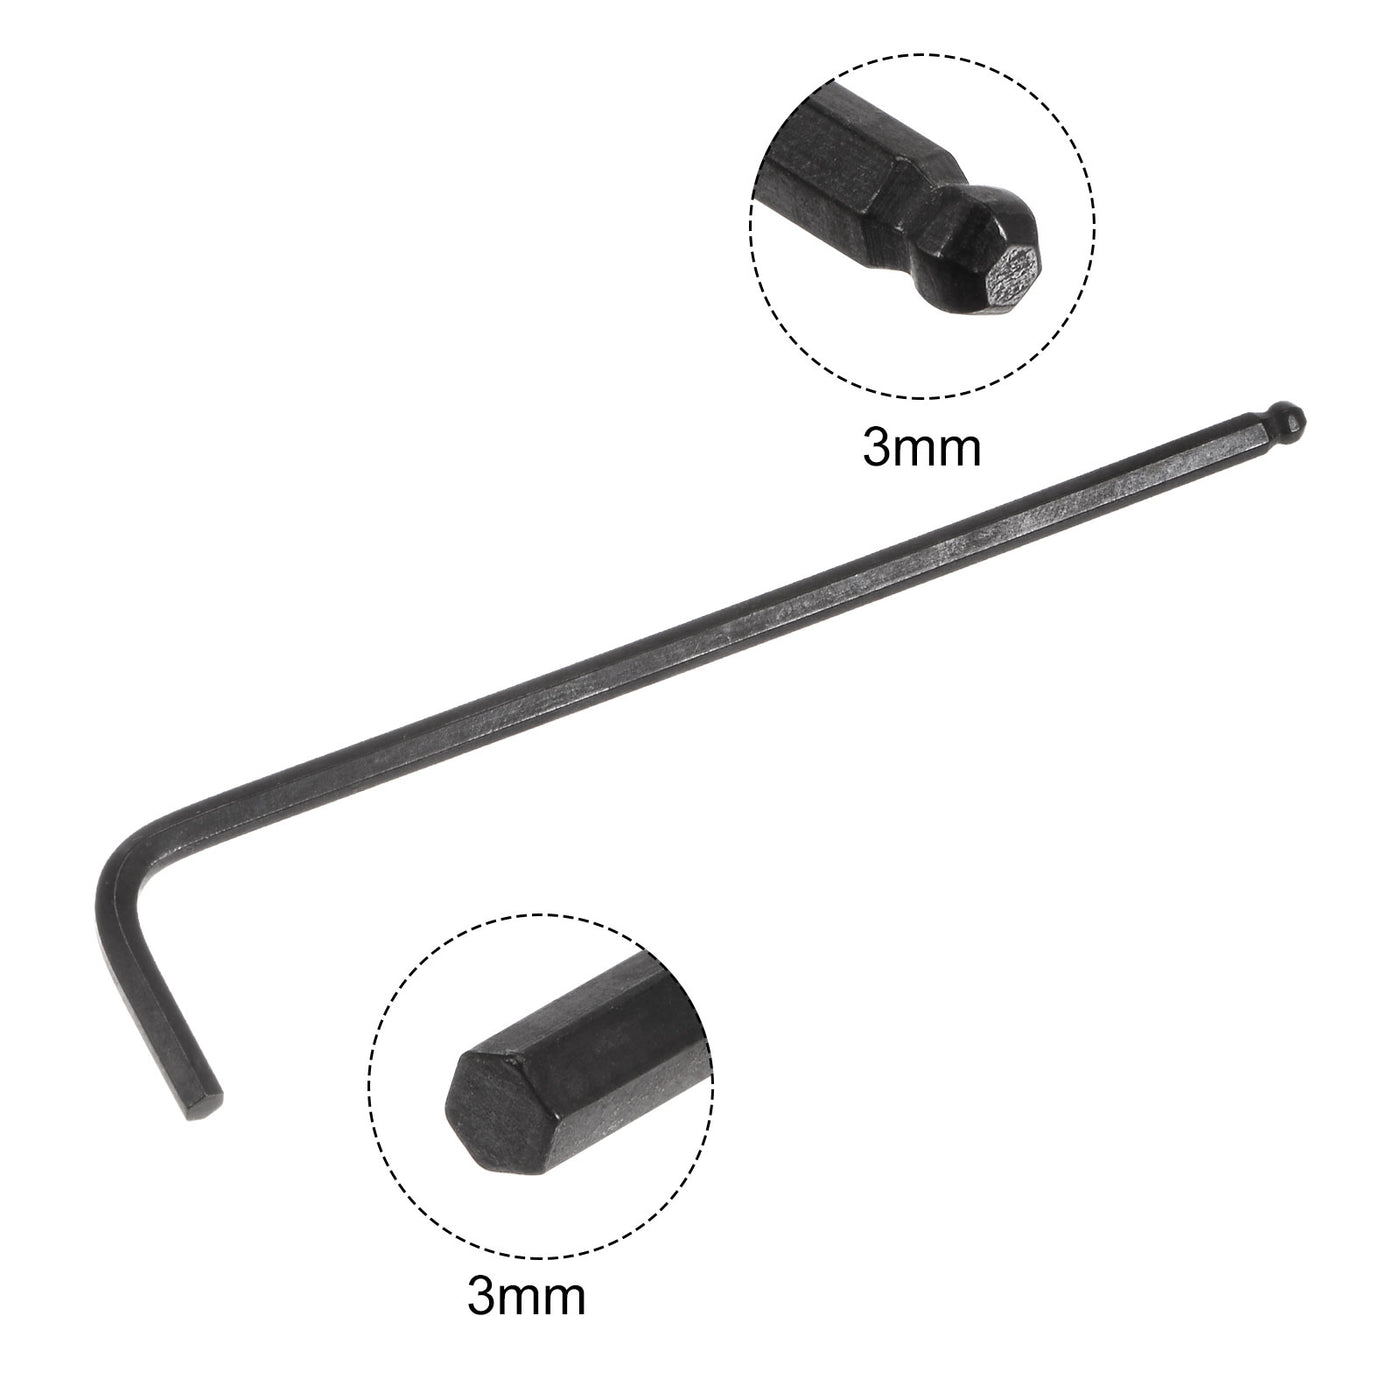 uxcell Uxcell 3mm Ball End Hex Key Wrench, L Shaped Long Arm CR-V Repairing Tool, Black